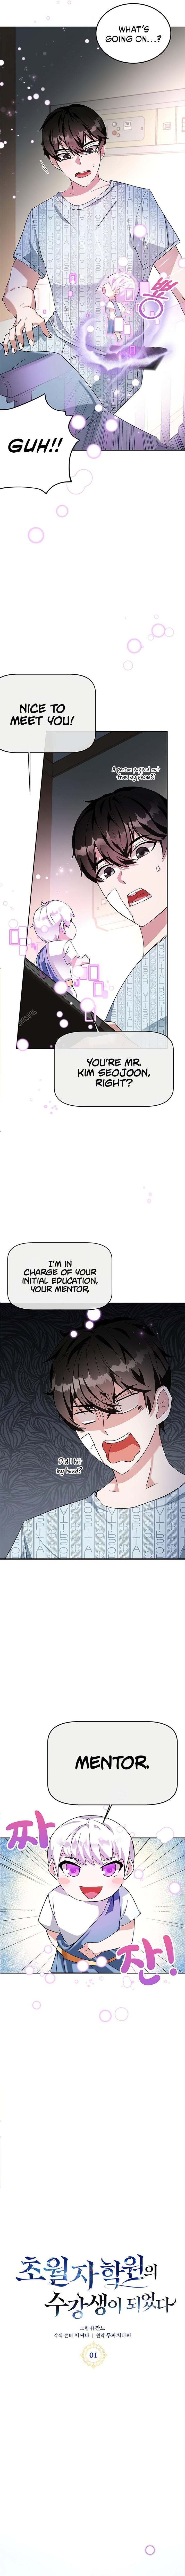 Transcension Academy - Chapter 1 Page 13